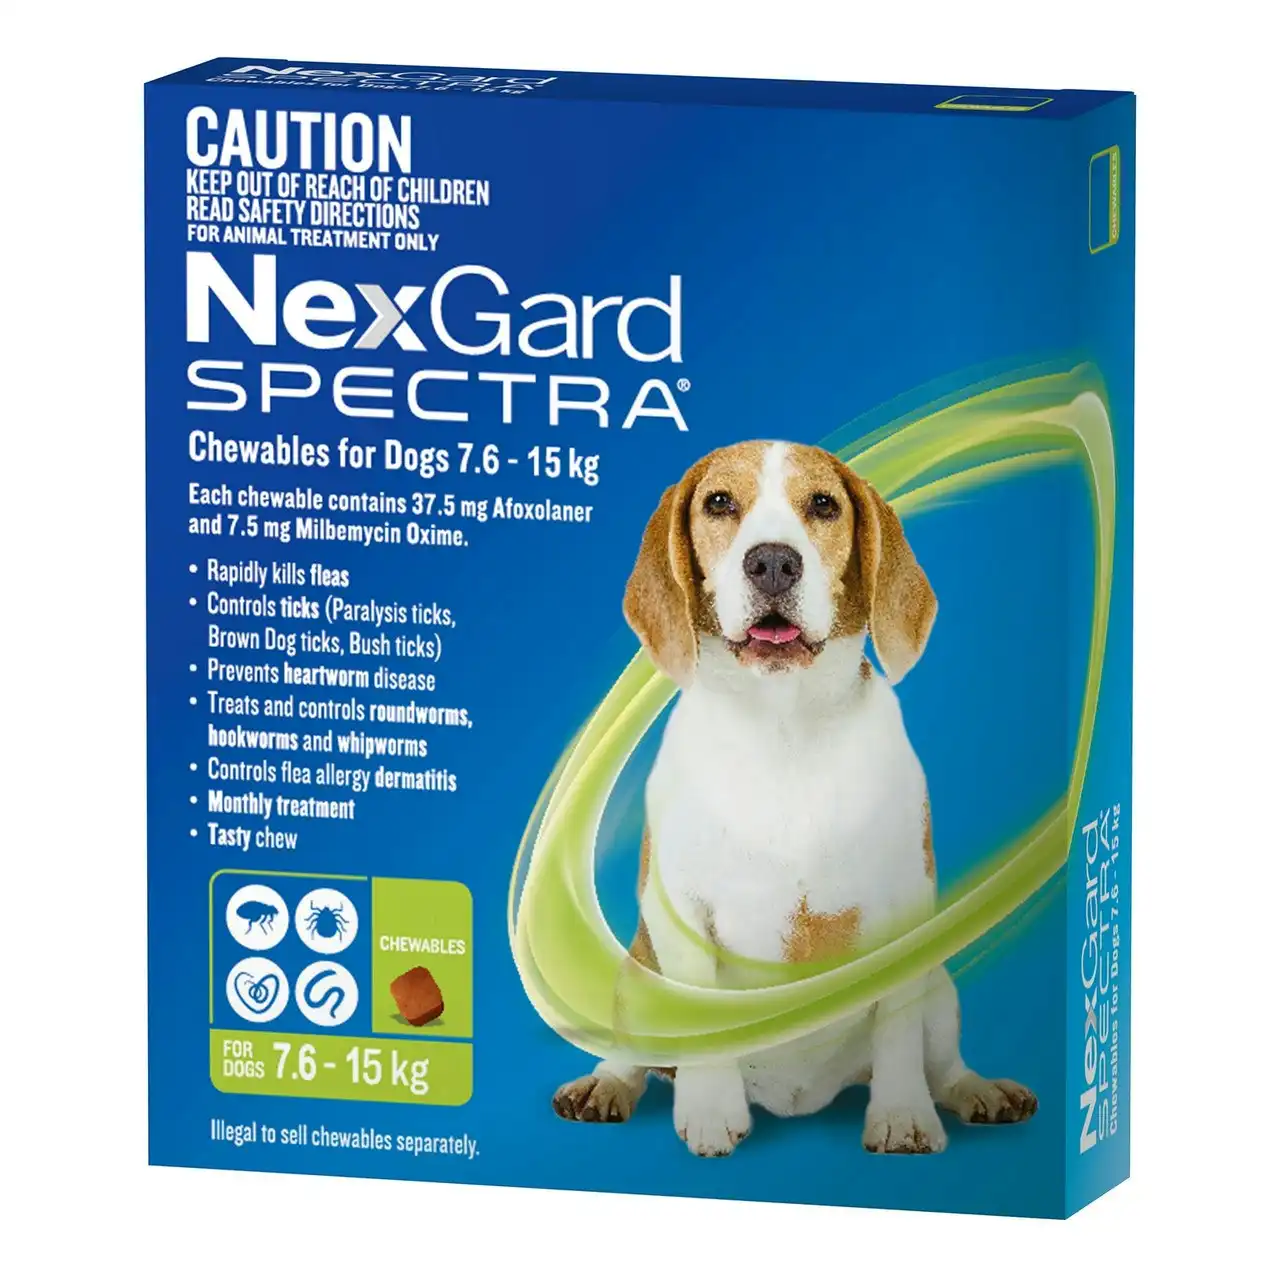 Nexgard Spectra Chewables For Dogs 7.6 - 15kg 3 Pack